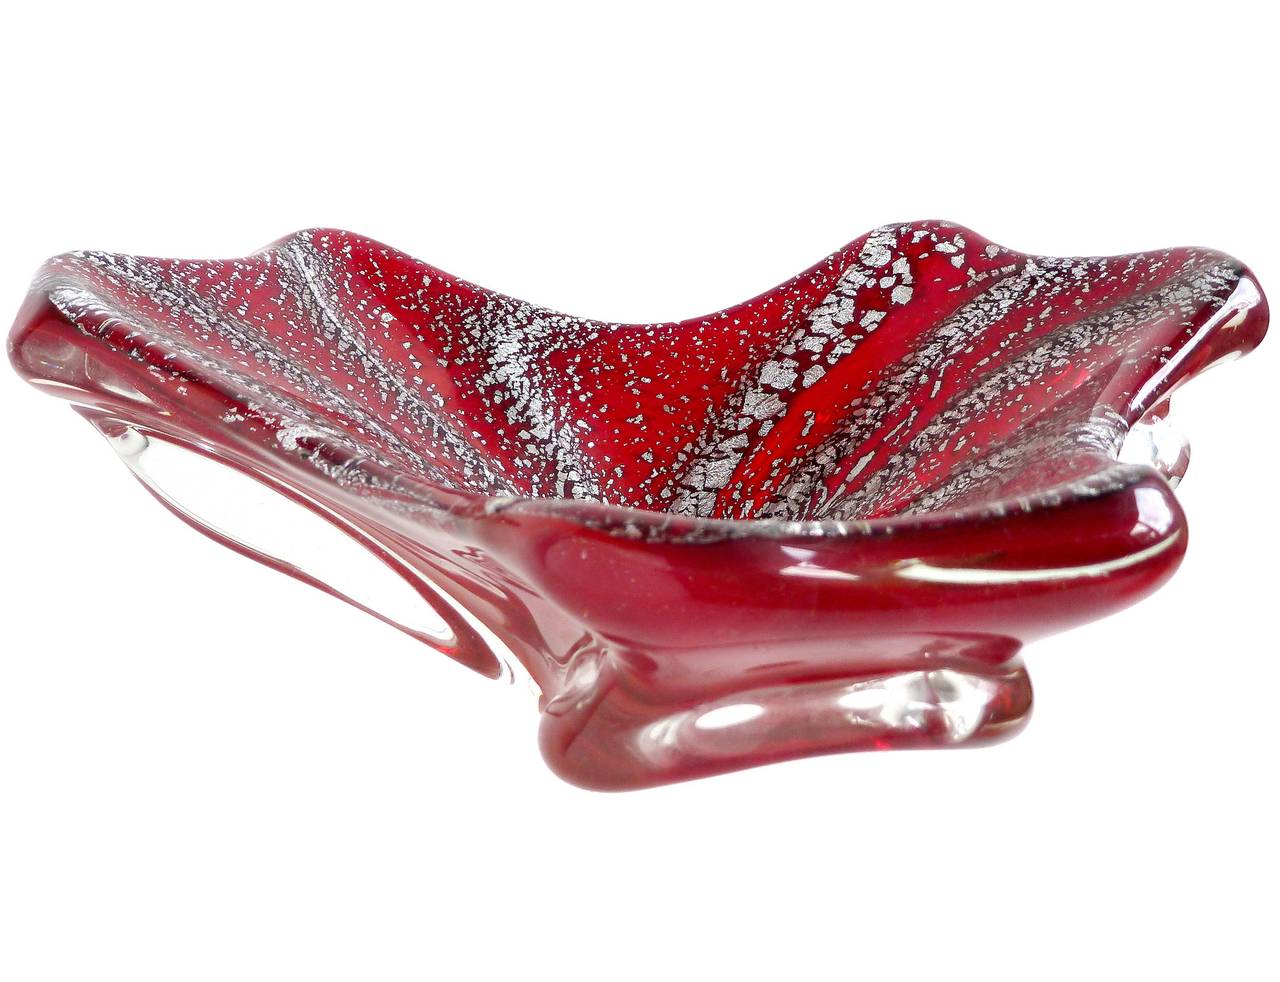 Beautiful Murano hand blown red and silver flecks Italian art glass biomorphic bowl. The piece is cased over with clear glass, and pulled from underneath to create the shape. It has very heavy silver leaf throughout in a spiral pattern. A statement